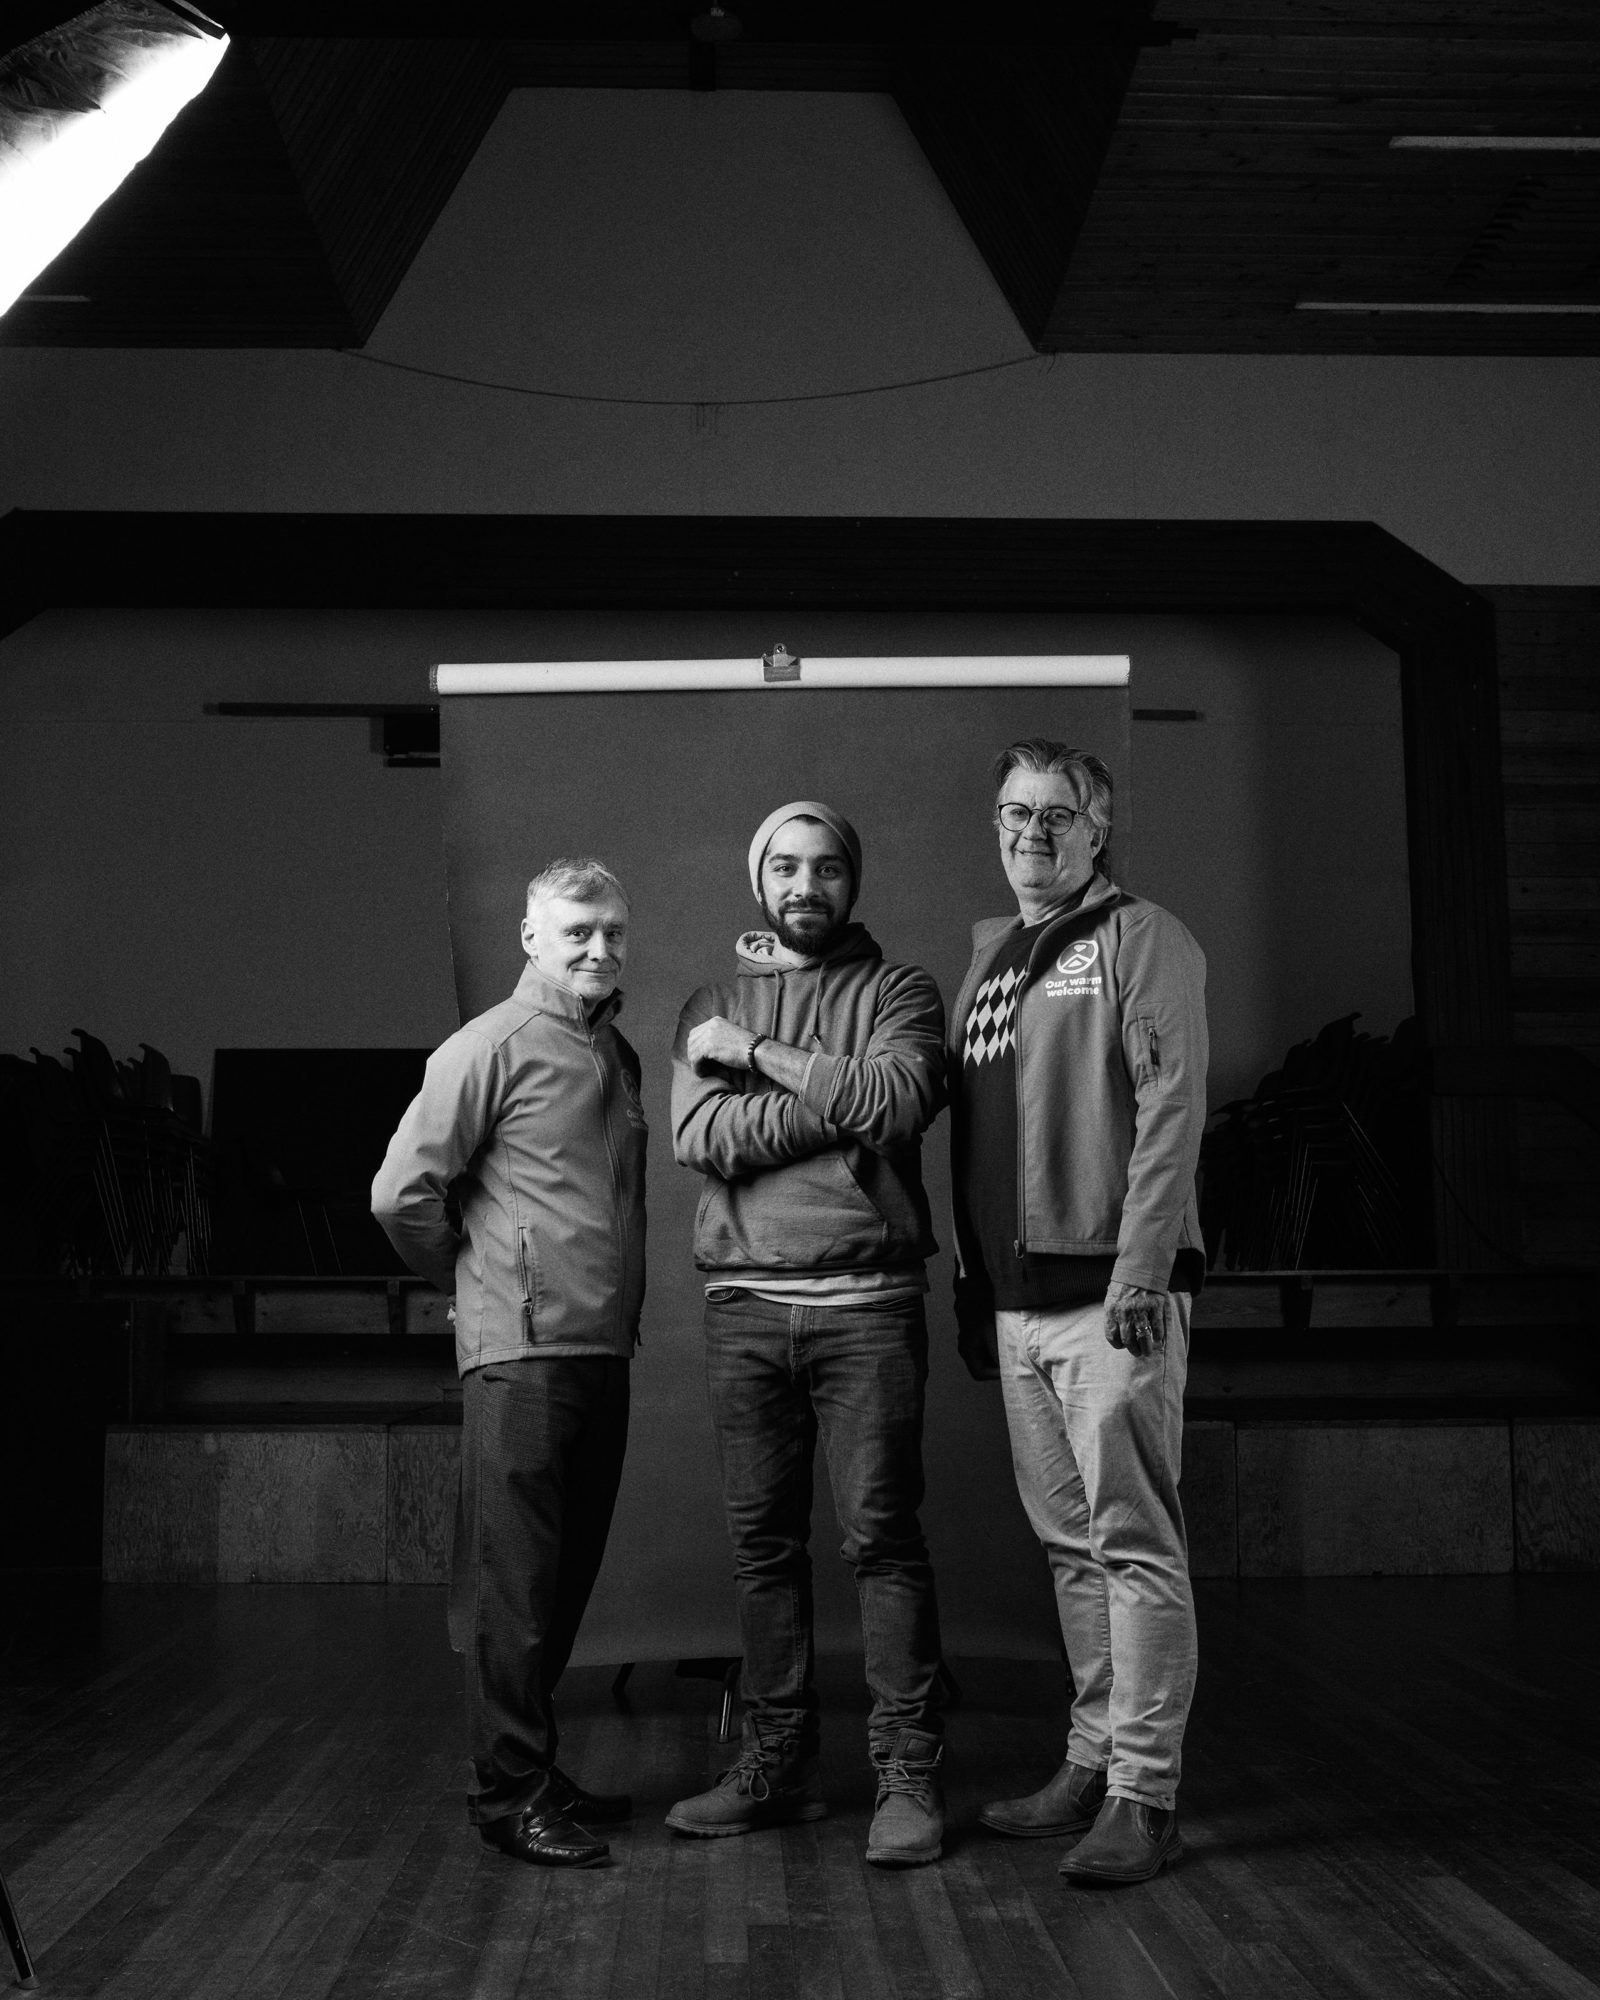 Abdullrhman Hassona stands with two supporters of the project in a large wooden floored room, the image is in black and white.